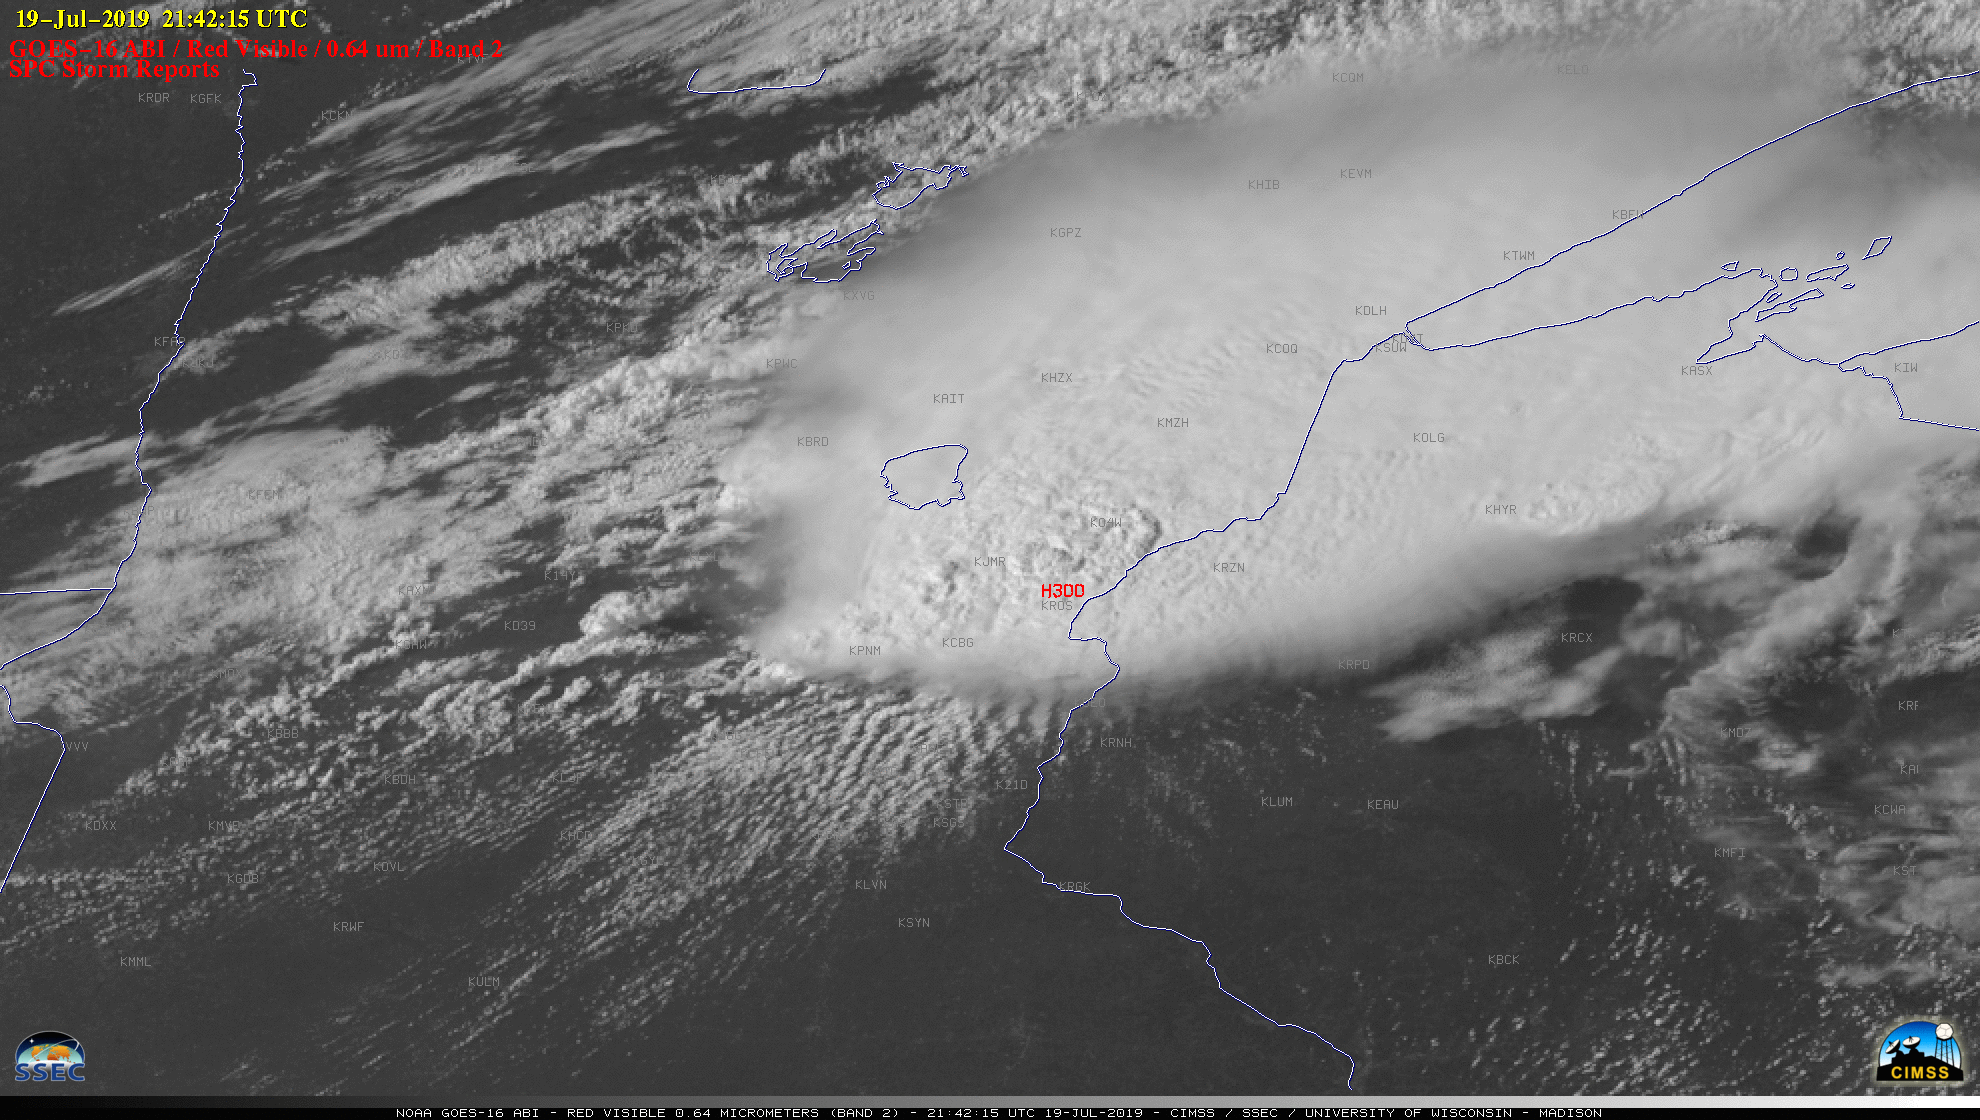 GOES-16 "Red" Visible (0.64 µm) images, with SPC Storm Reports plotted in red [click to play MP4 animation]